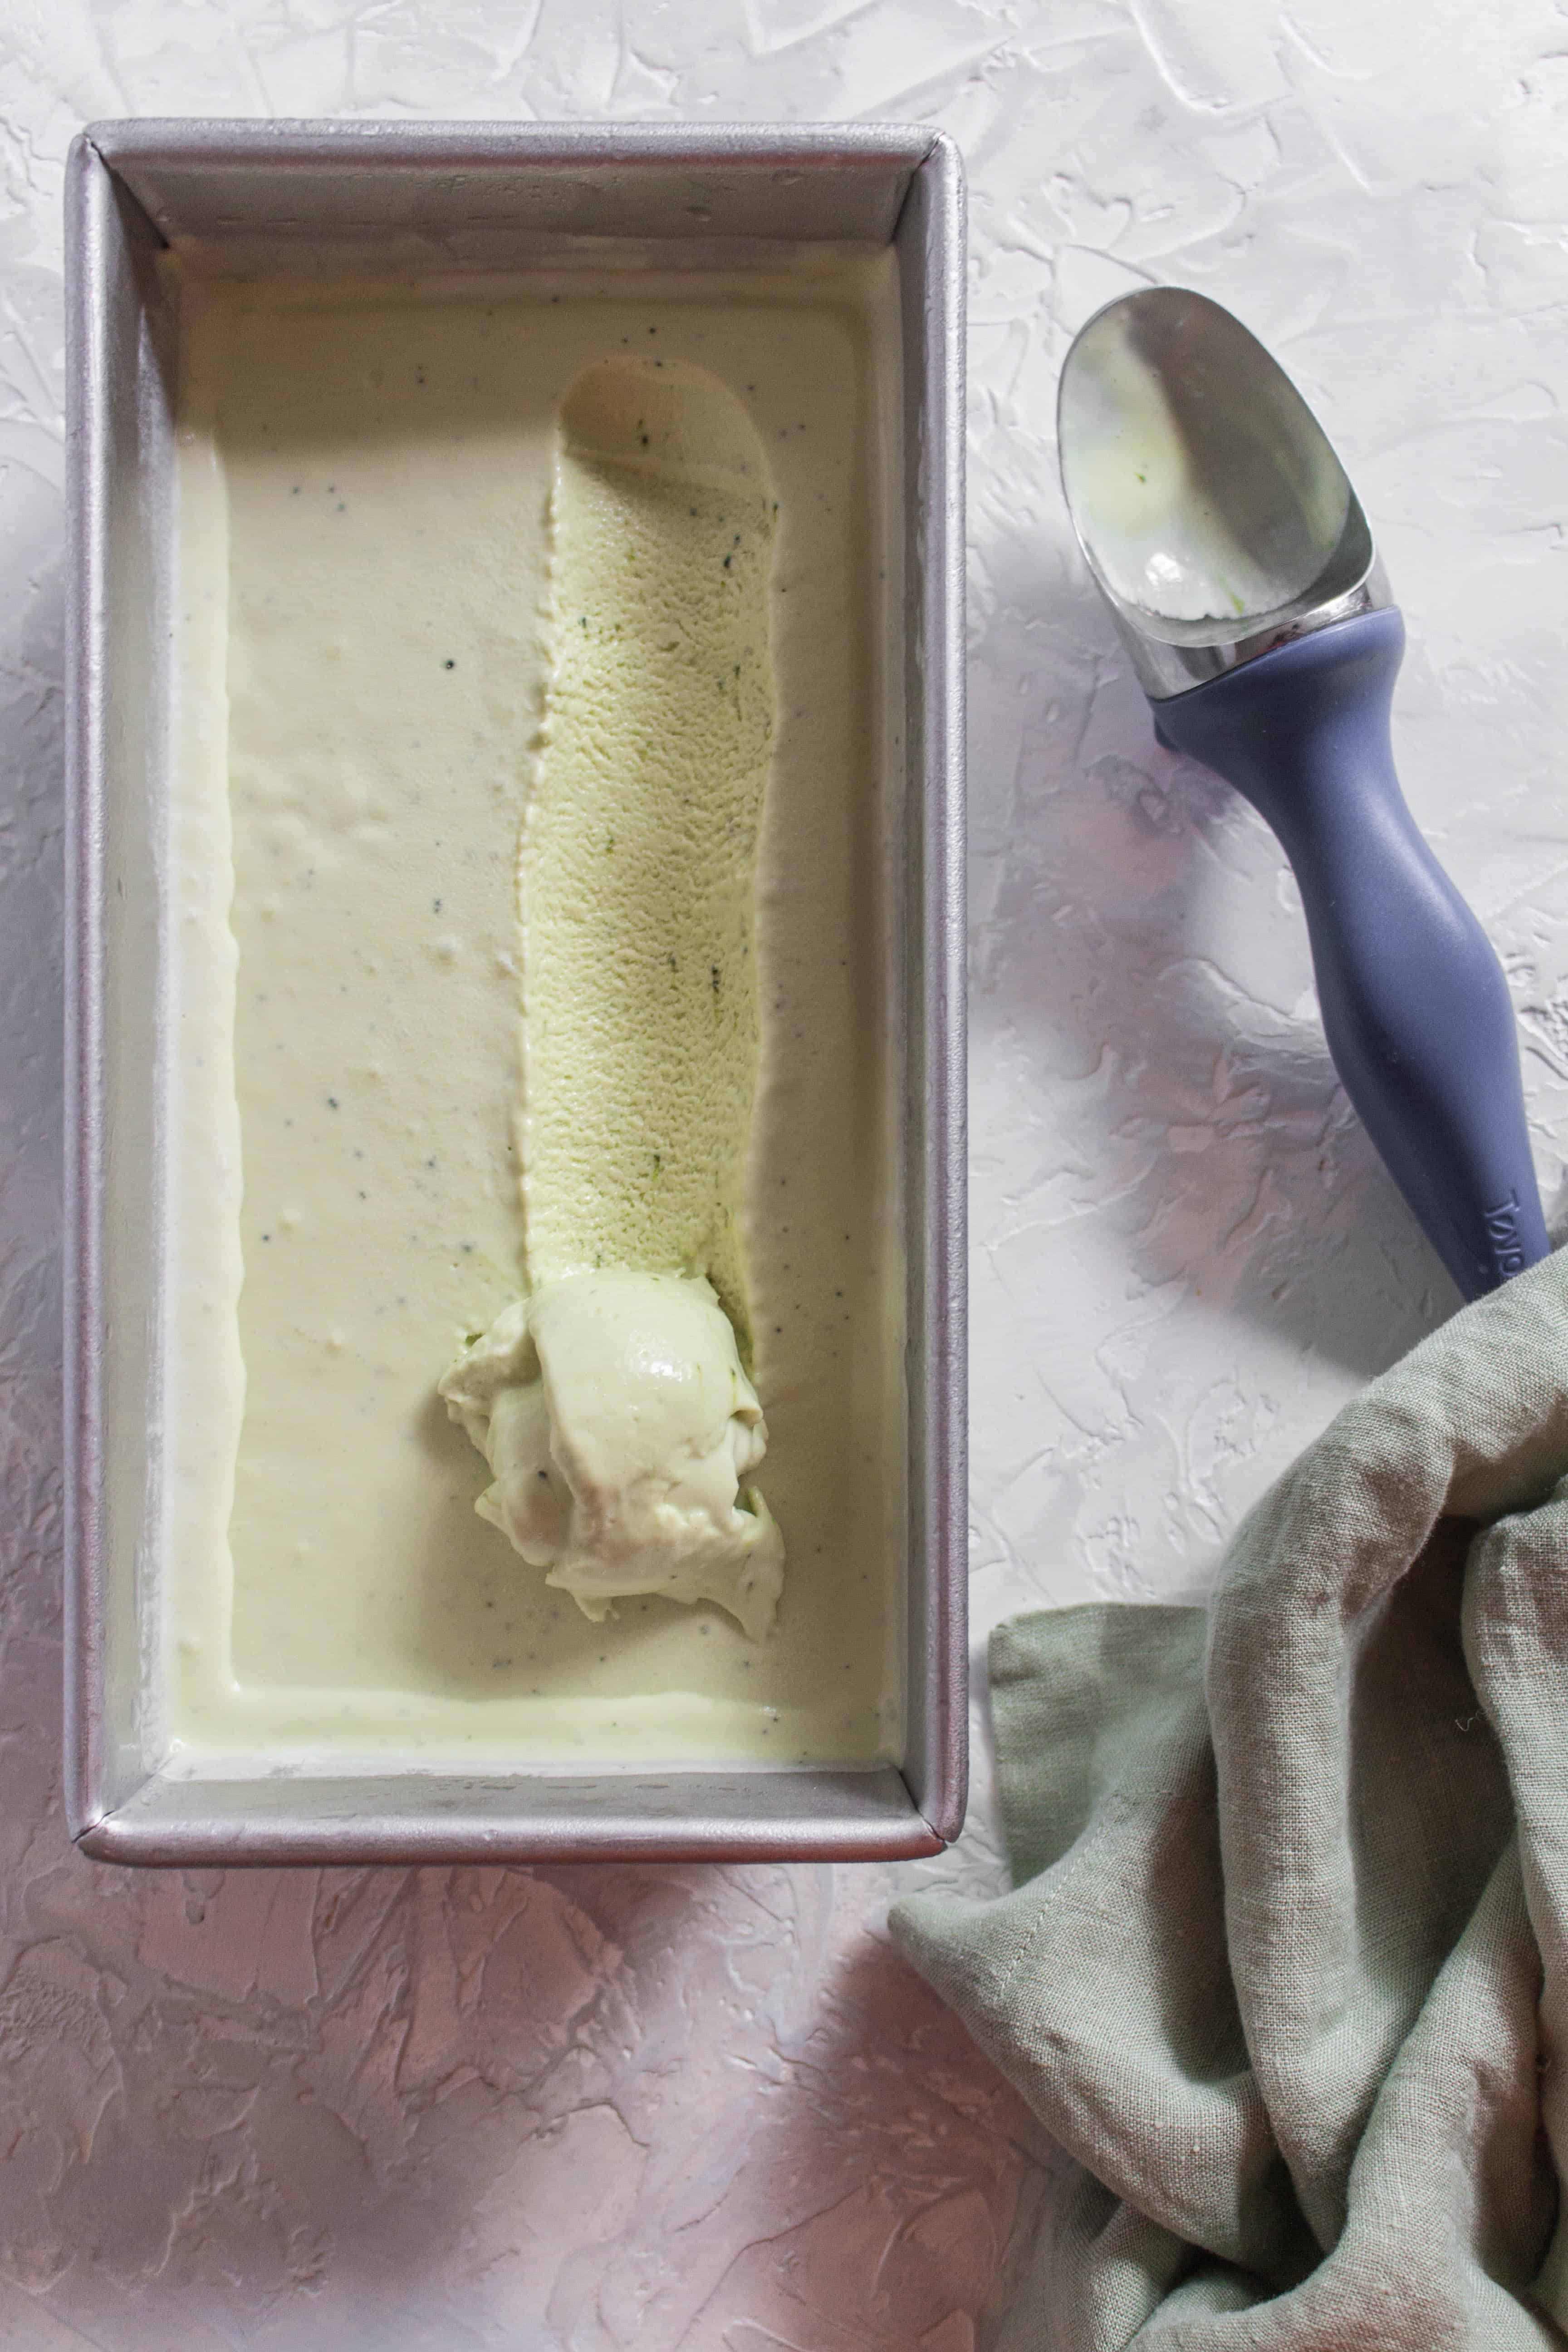 Treat your friends and family to some delicious homemade Matcha Ice Cream that doesn't require an ice cream maker to make!